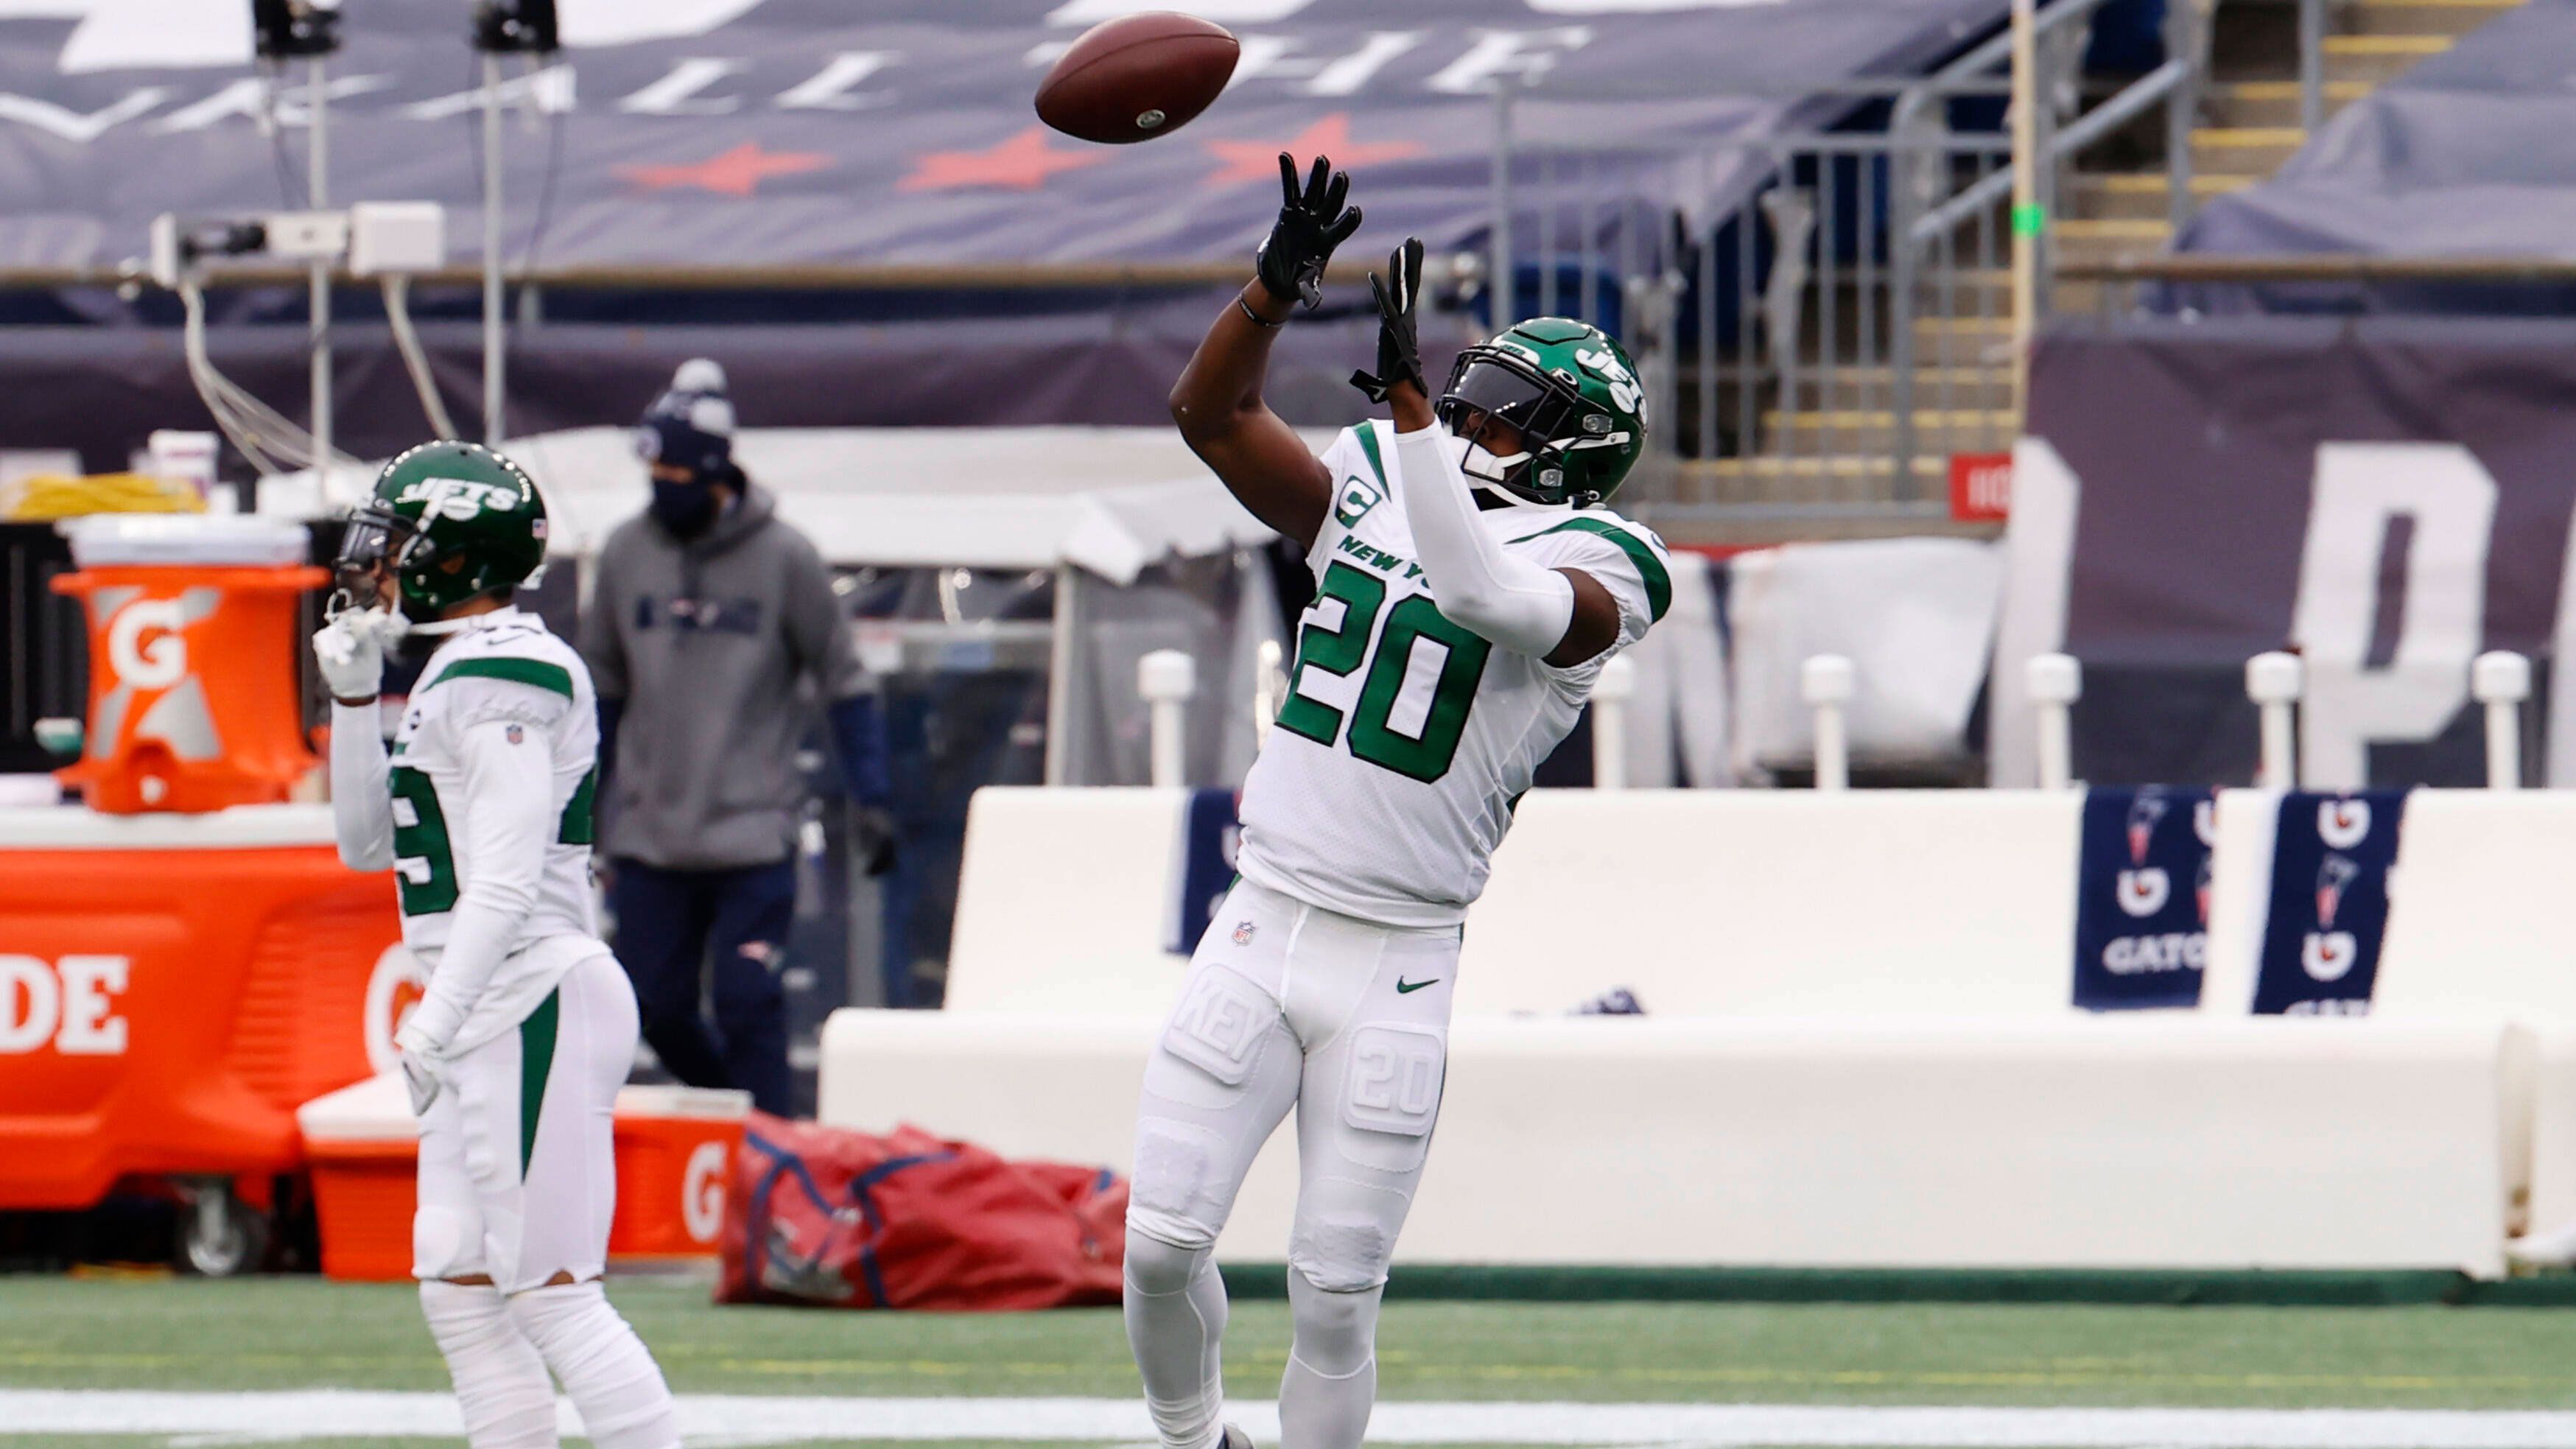 
                <strong>Marcus Maye (New York Jets)</strong><br>
                Position: Safety - Gedraftet: 2017 (Runde 2/Pick 39) - NFL-Spiele: 60 - Wichtigste Statistiken: 312 Tackles, 3,5 Sacks, sechs Interceptions, vier Forced Fumbles
              